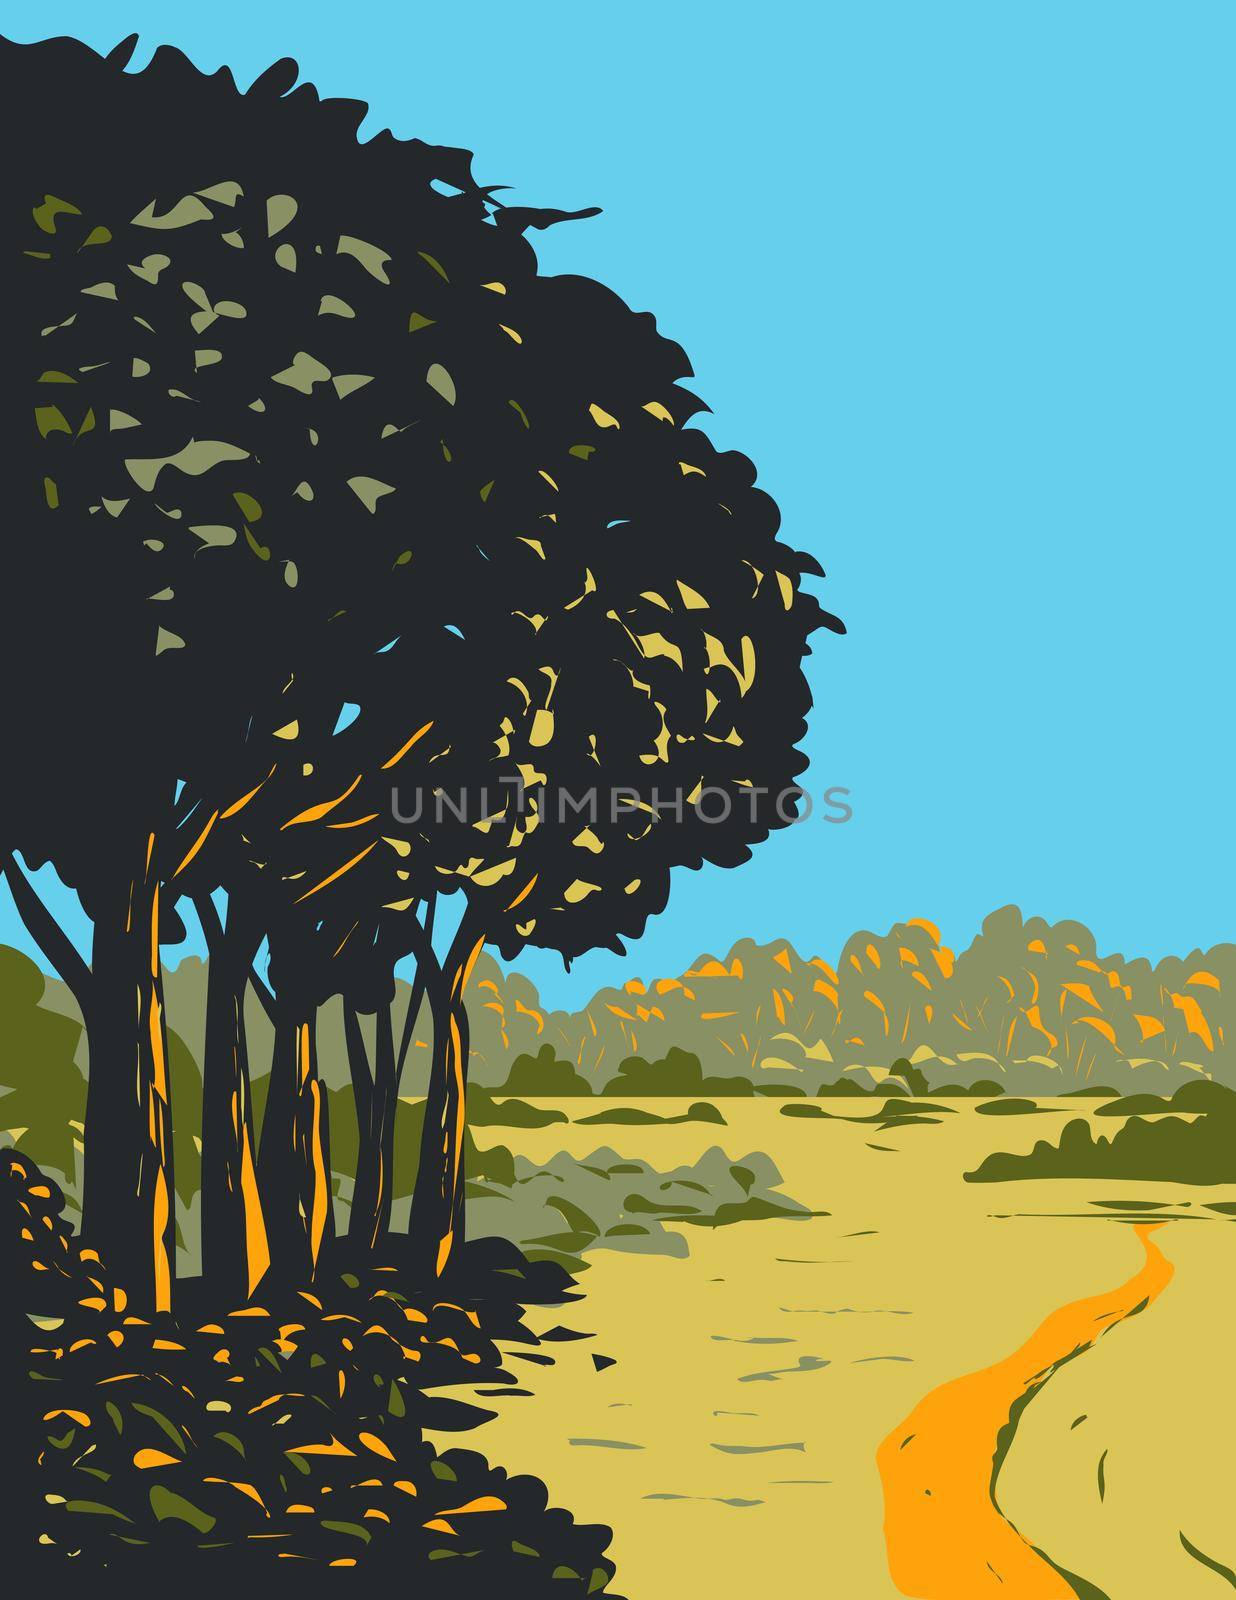 Art Deco or WPA poster of  heathland and forest trails in New Forest located within New Forest National Park in  Southern England, United Kingdom done in works project administration style.